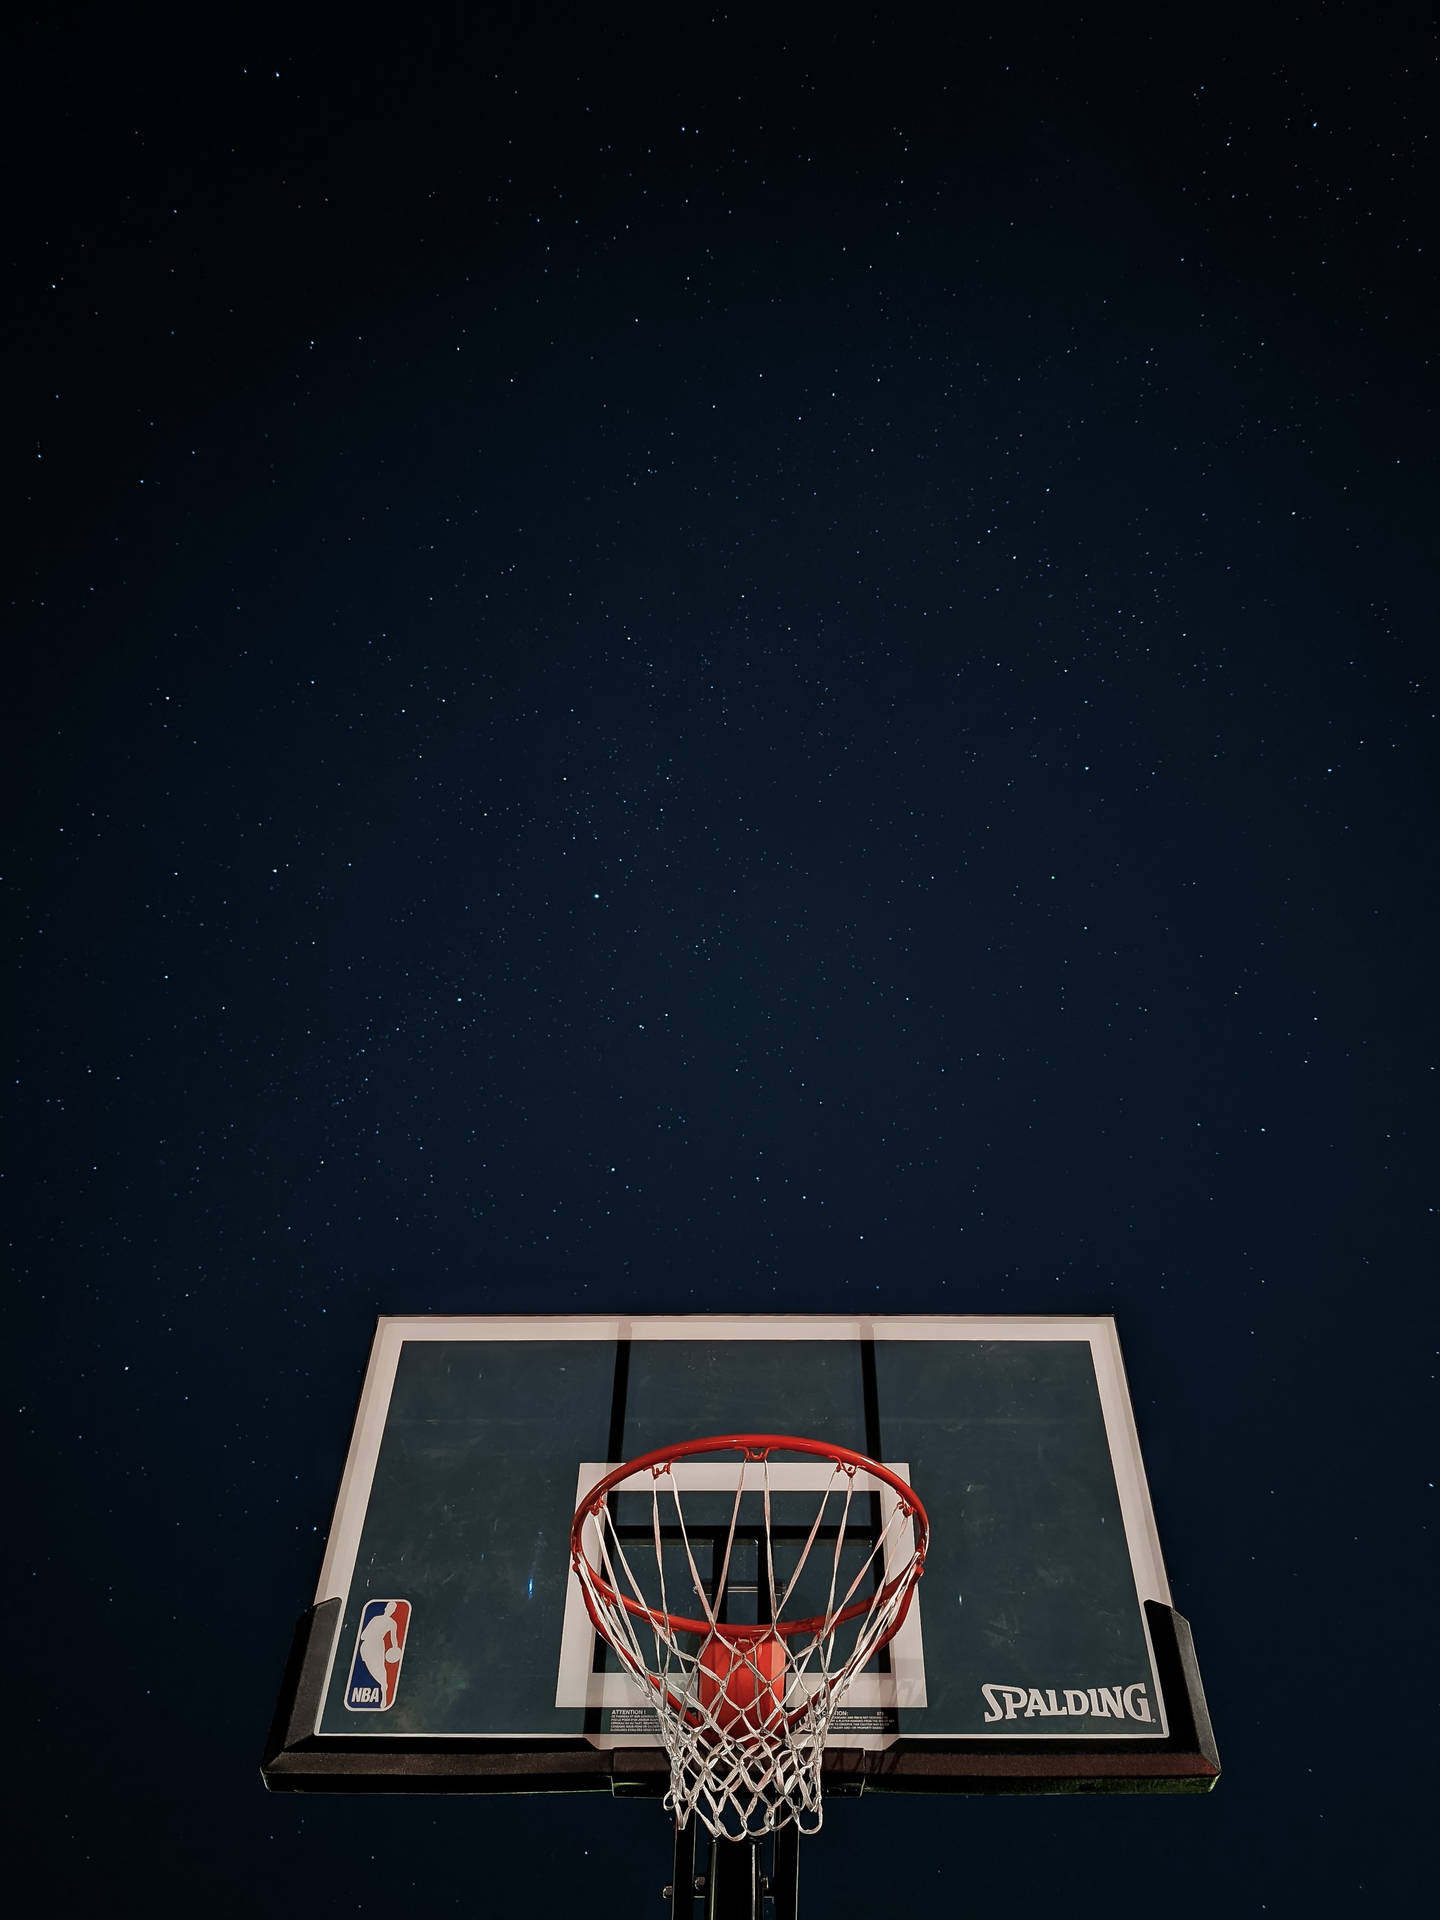 Coolest Iphone Basketball Ring